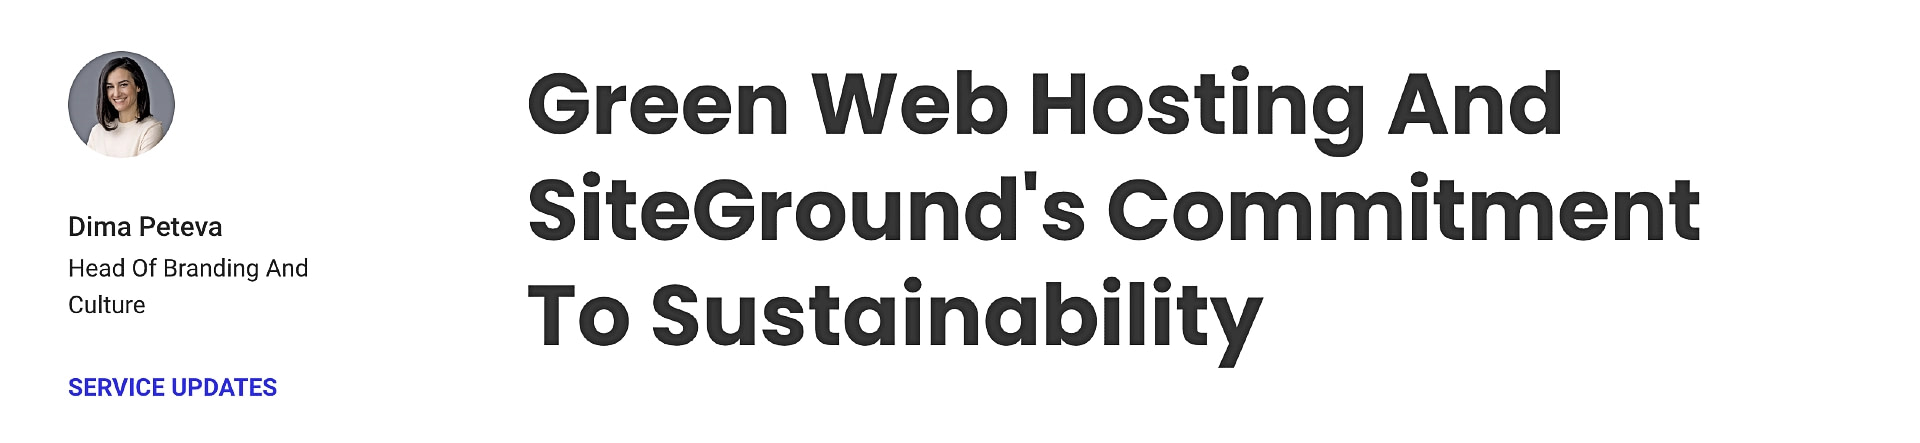 SiteGround is a proud green web hosting provider.